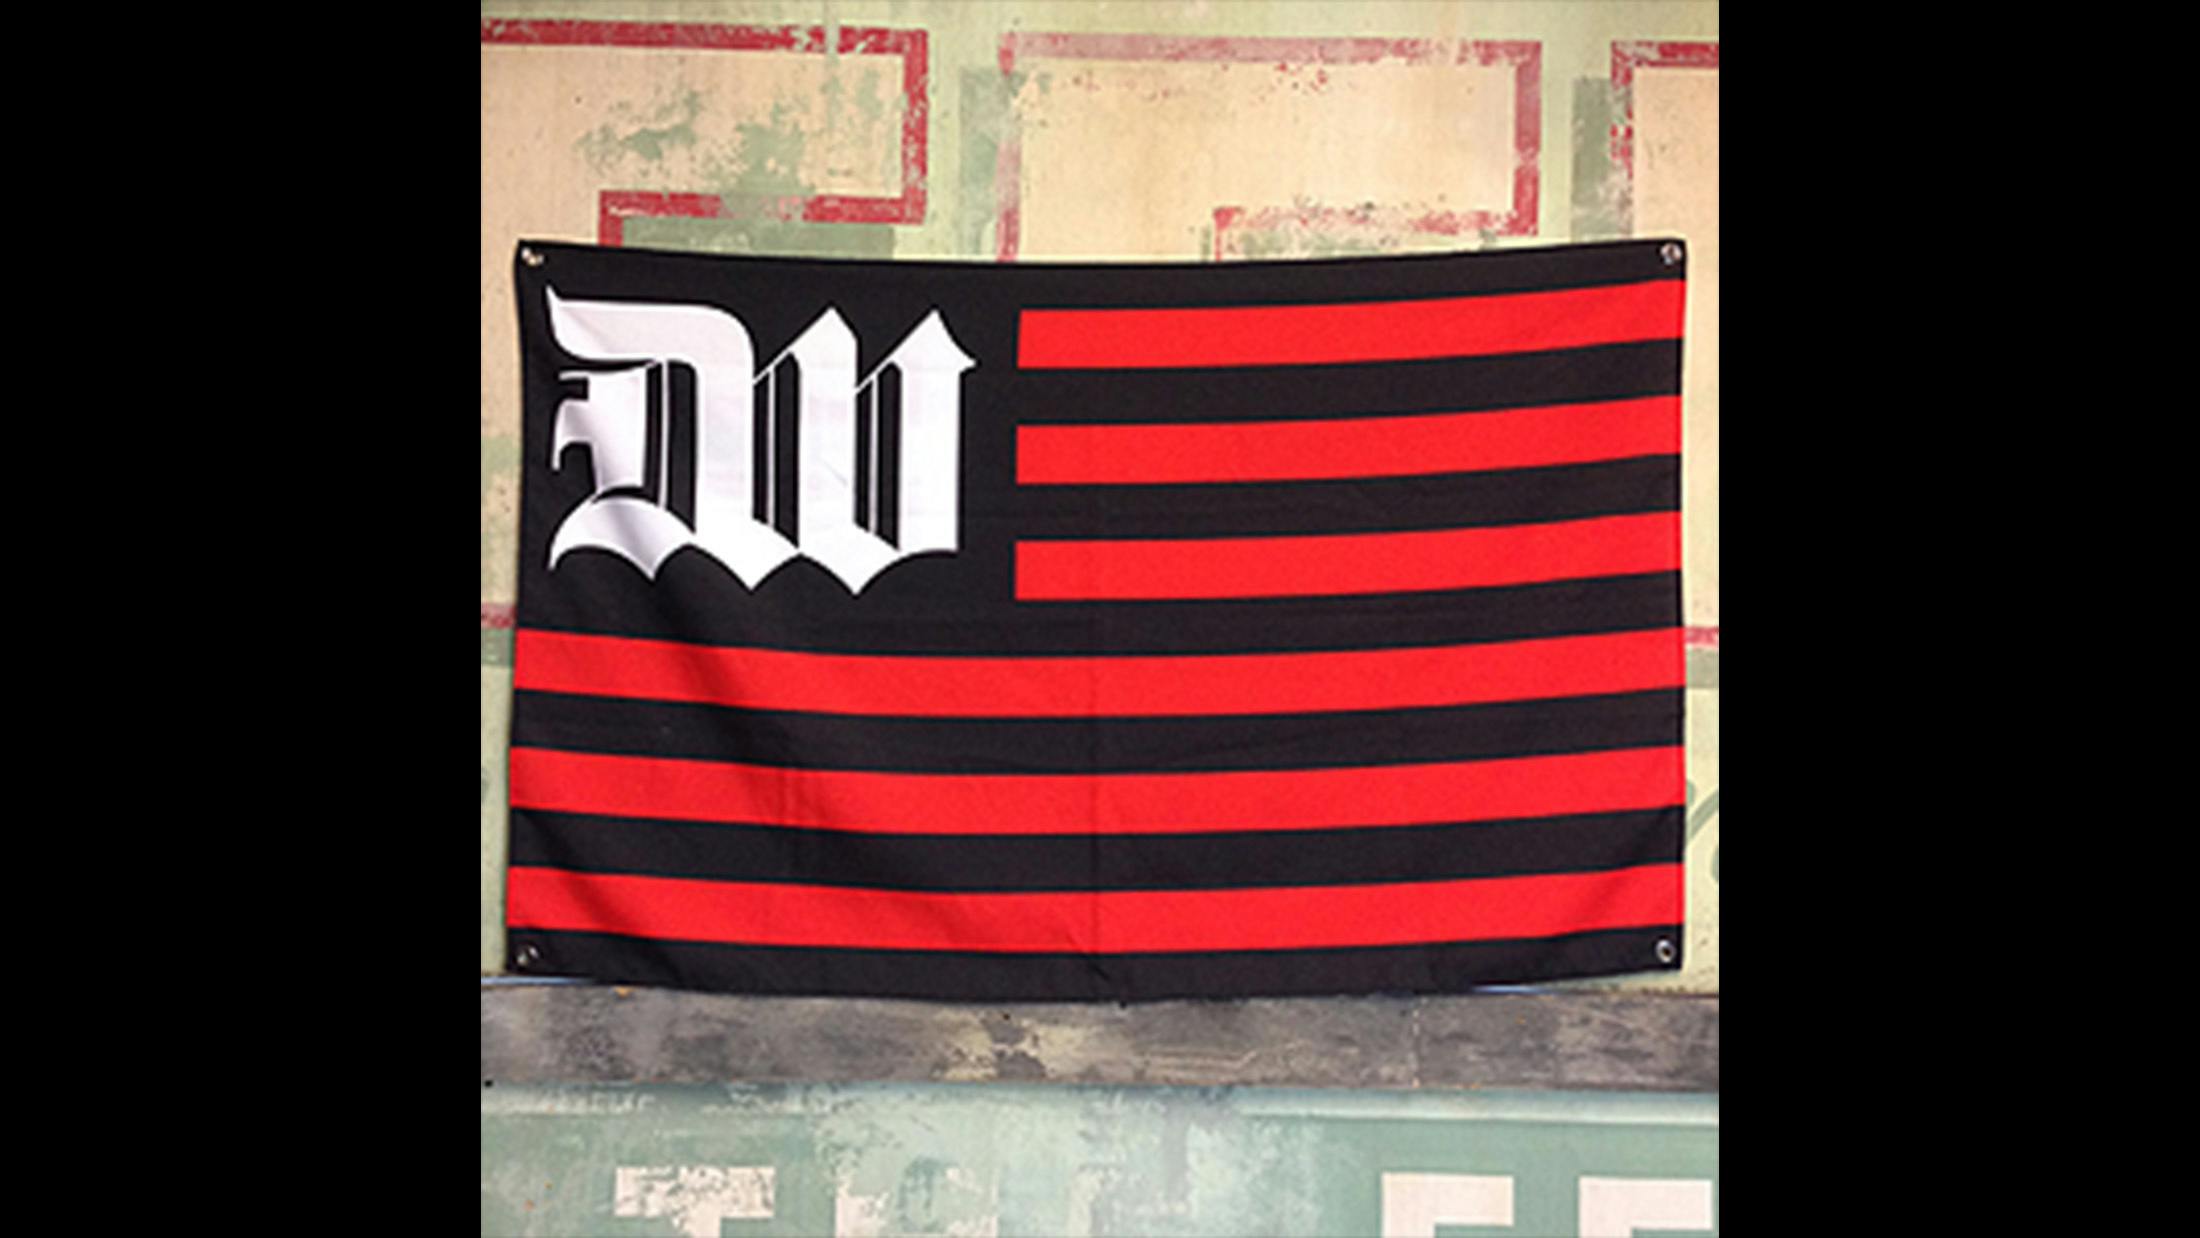 Far be it for us to suggest that the people charged with leading us through these grim and unsettling times don’t have the first damn clue what they’re doing. But we do know that Deathwish Inc. have never let us down, so maybe this is one flag worth flying.

$20.00 / £14.97

http://bit.ly/2yXKSsj